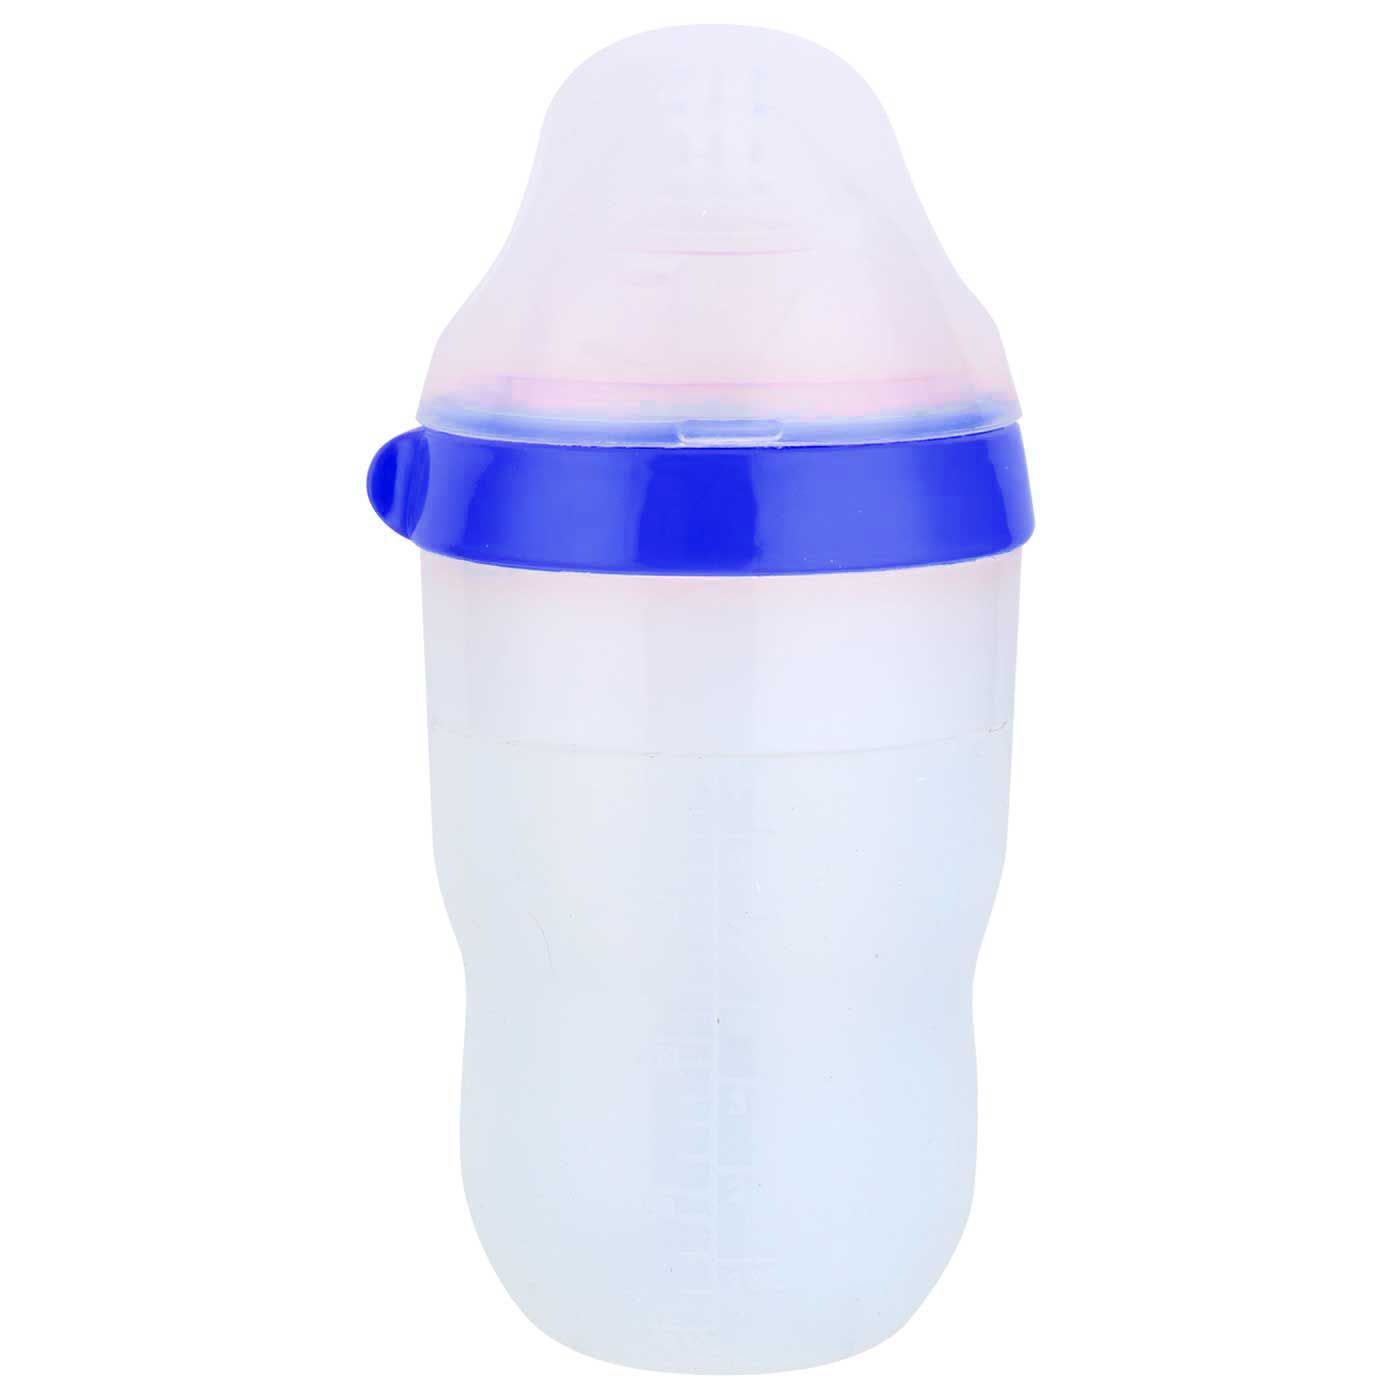 Ninio Silicone Bottle with Filter 7oz Blue - 3